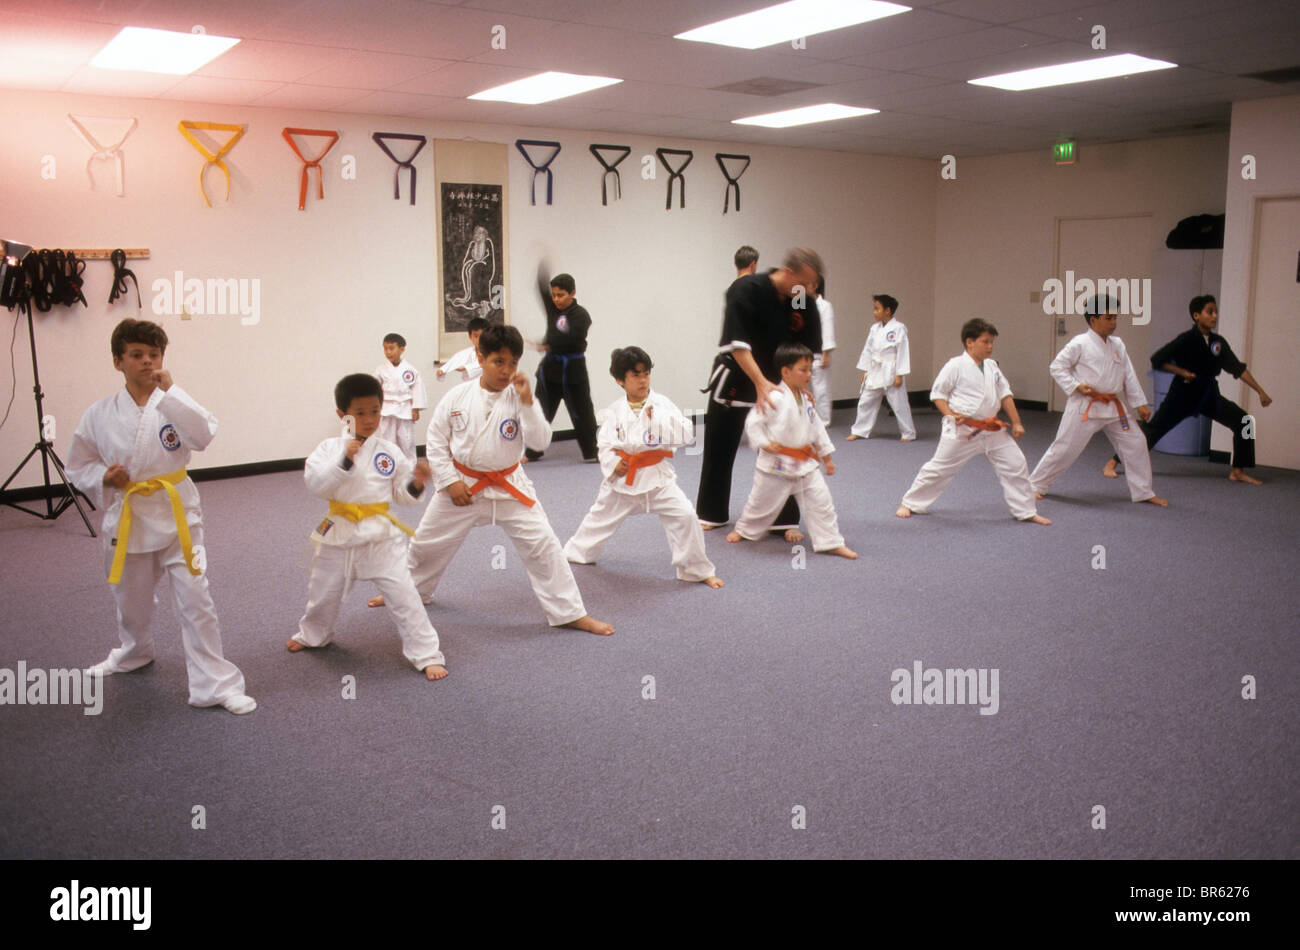 Dojo karate martial arts class self defense boy young youth belt teach learn instruct show demonstrate Stock Photo